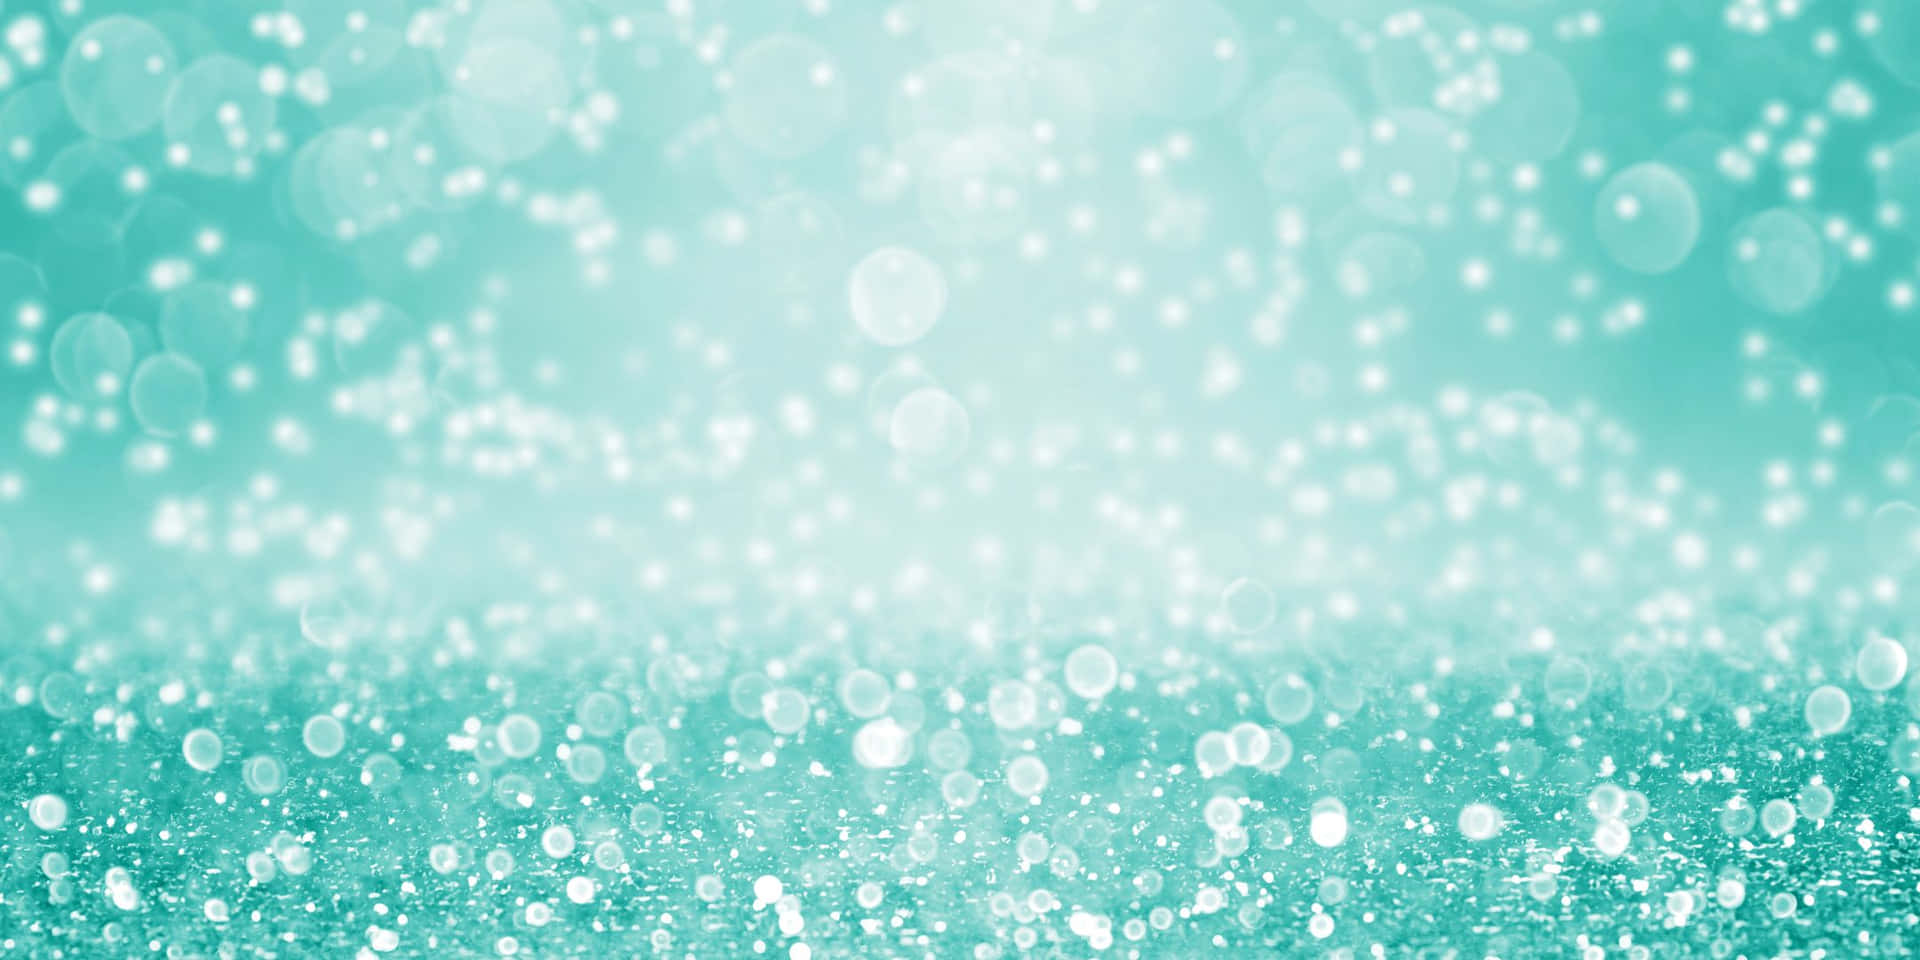 Make a statement with teal glitter background.